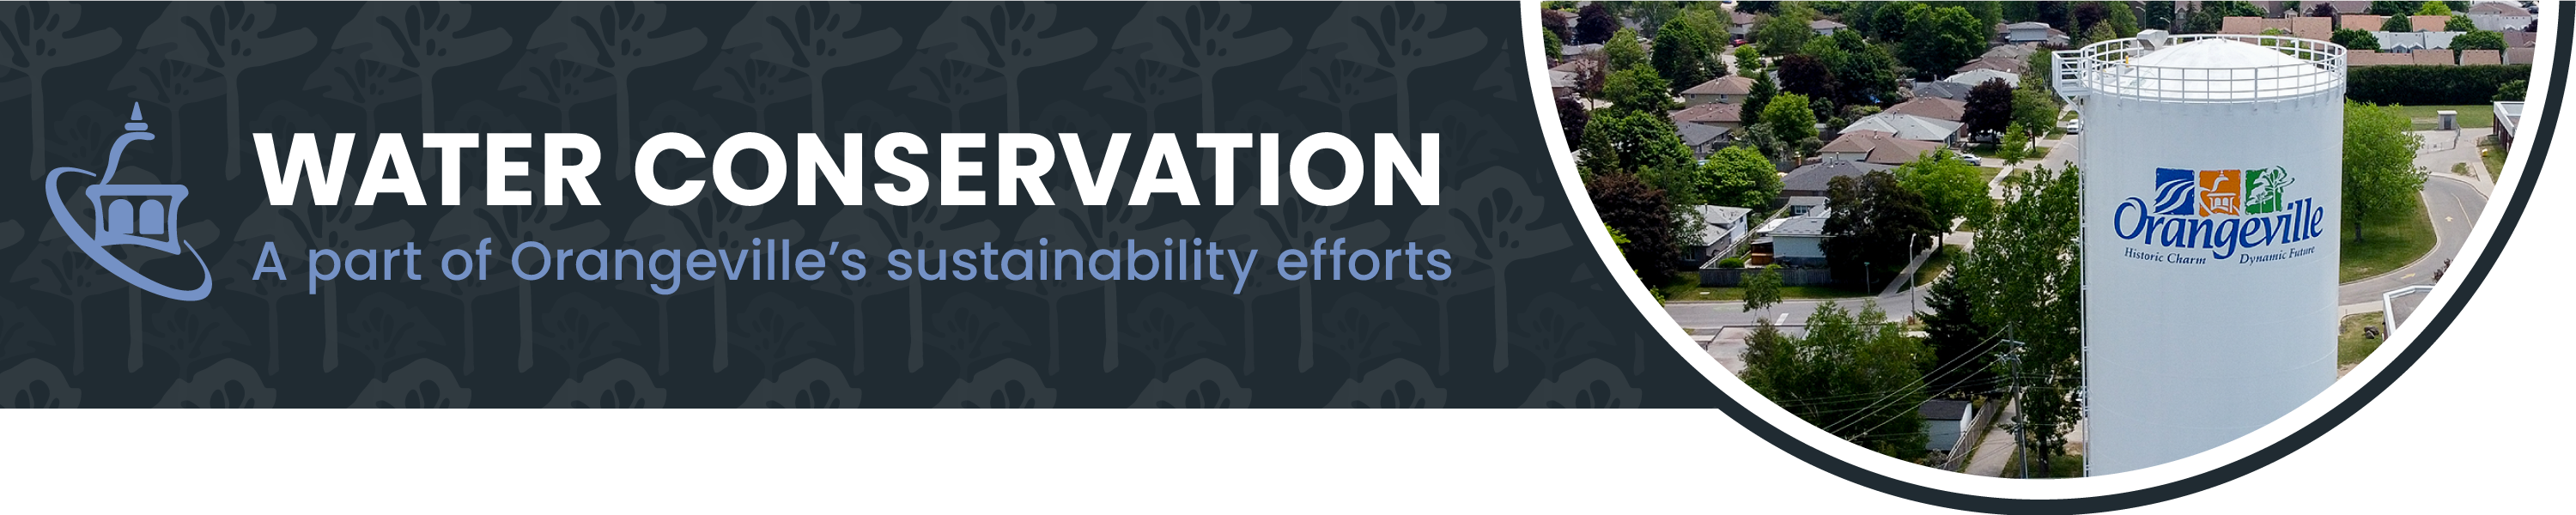 A web banner for Water Conservation